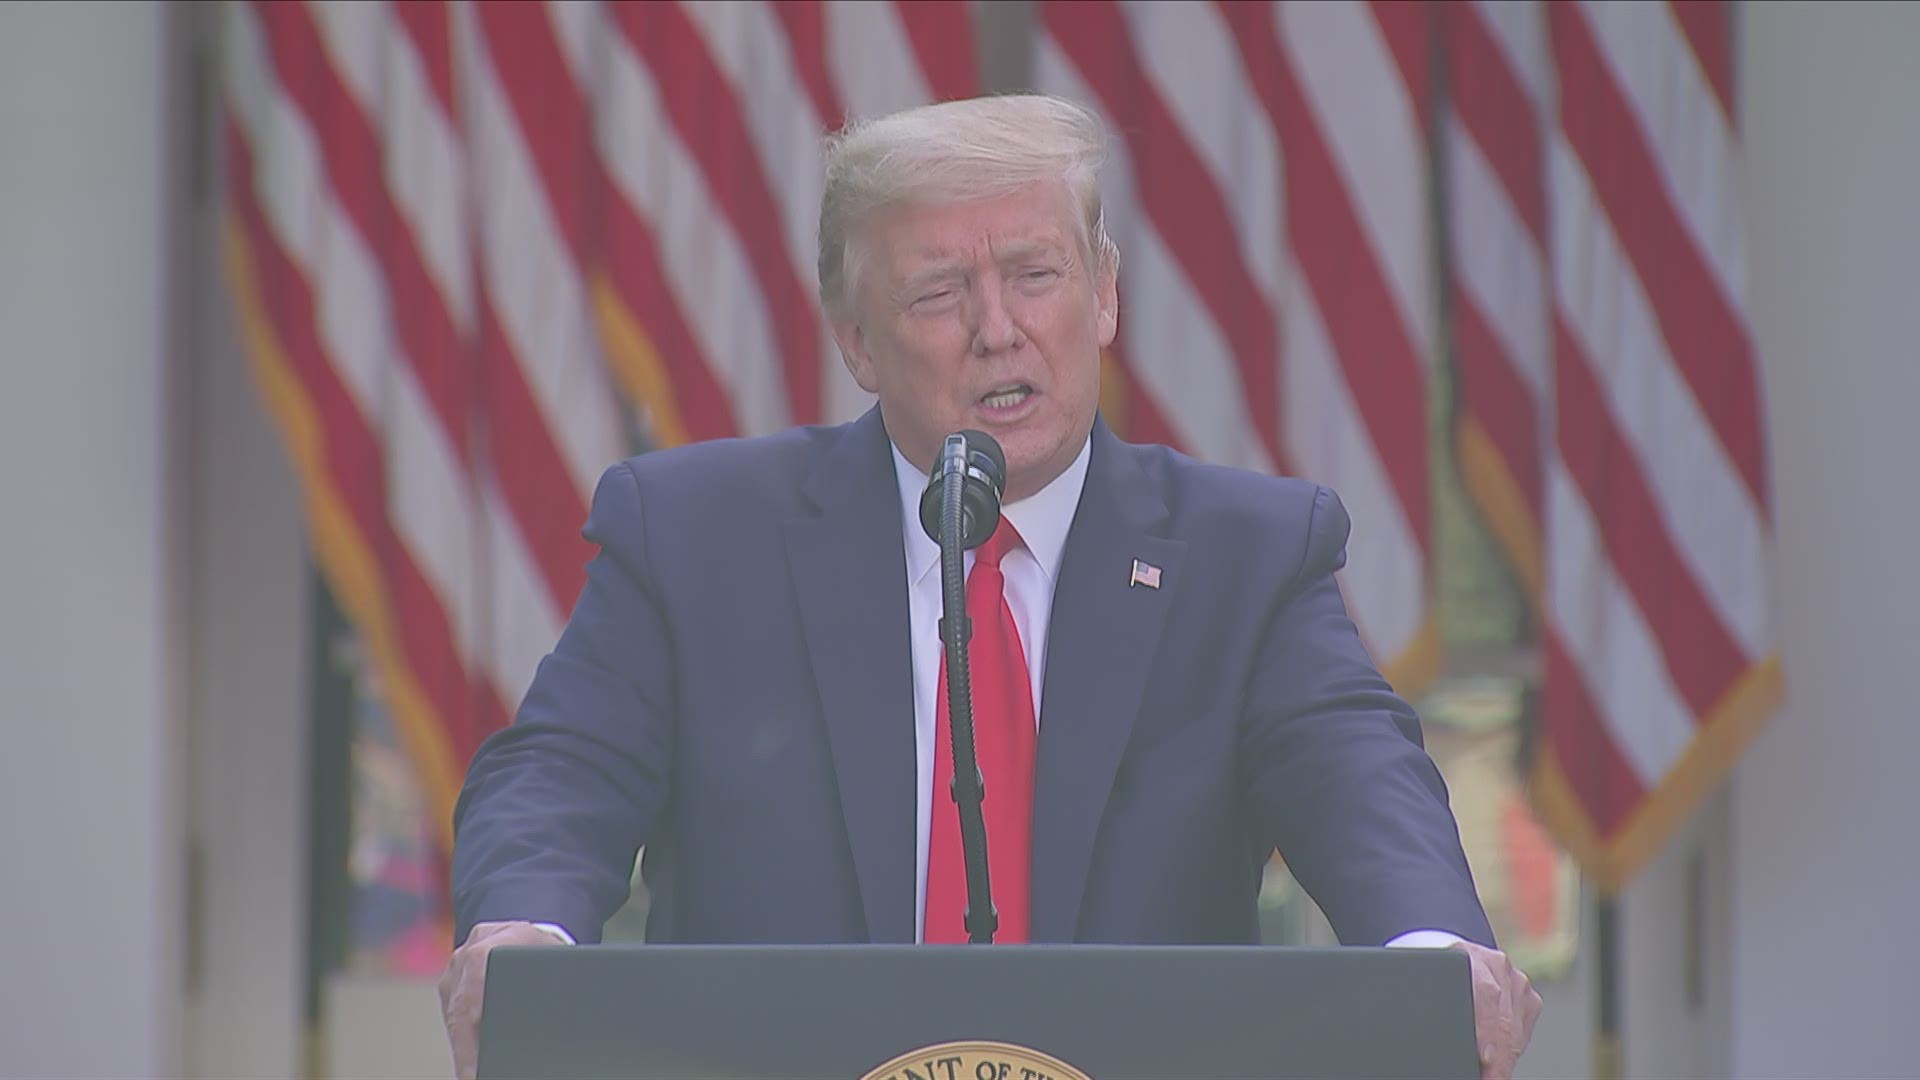 President Trump makes comments on plans to increase coronavirus testing and to reopen businesses.